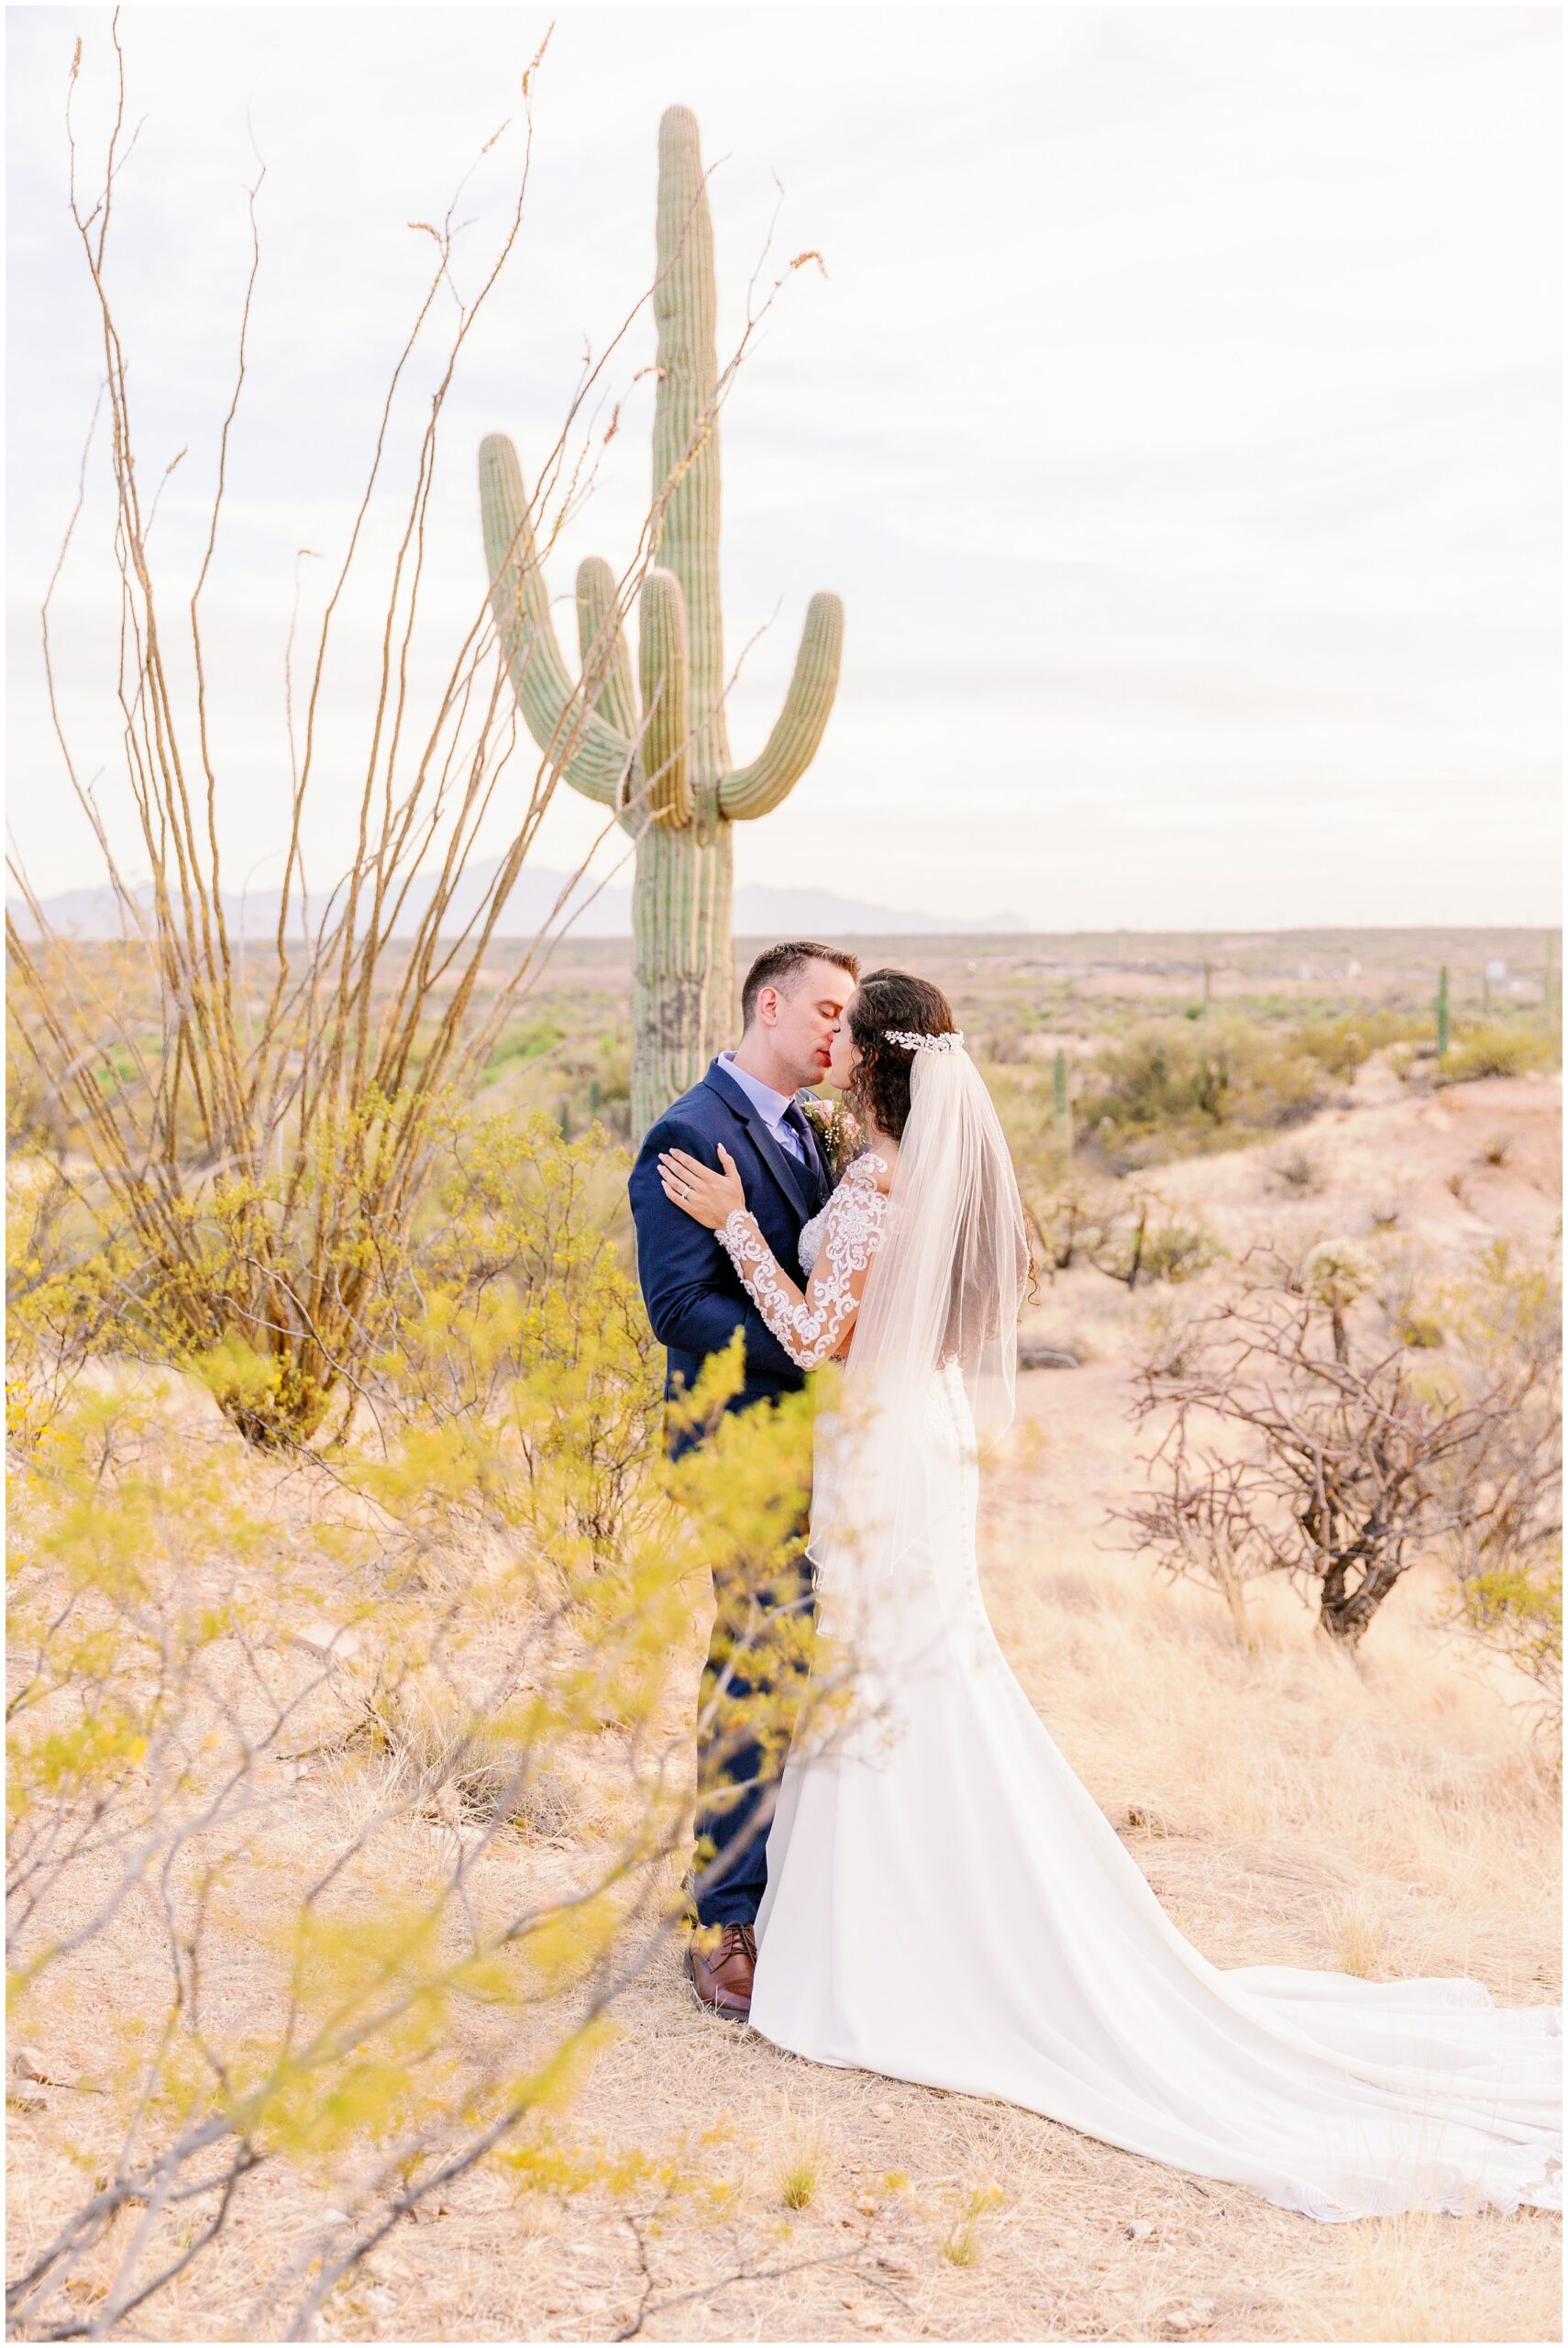 Bride and Groom share a kiss at Saguaro Buttes Wedding Venue in Tucson, Arizona.